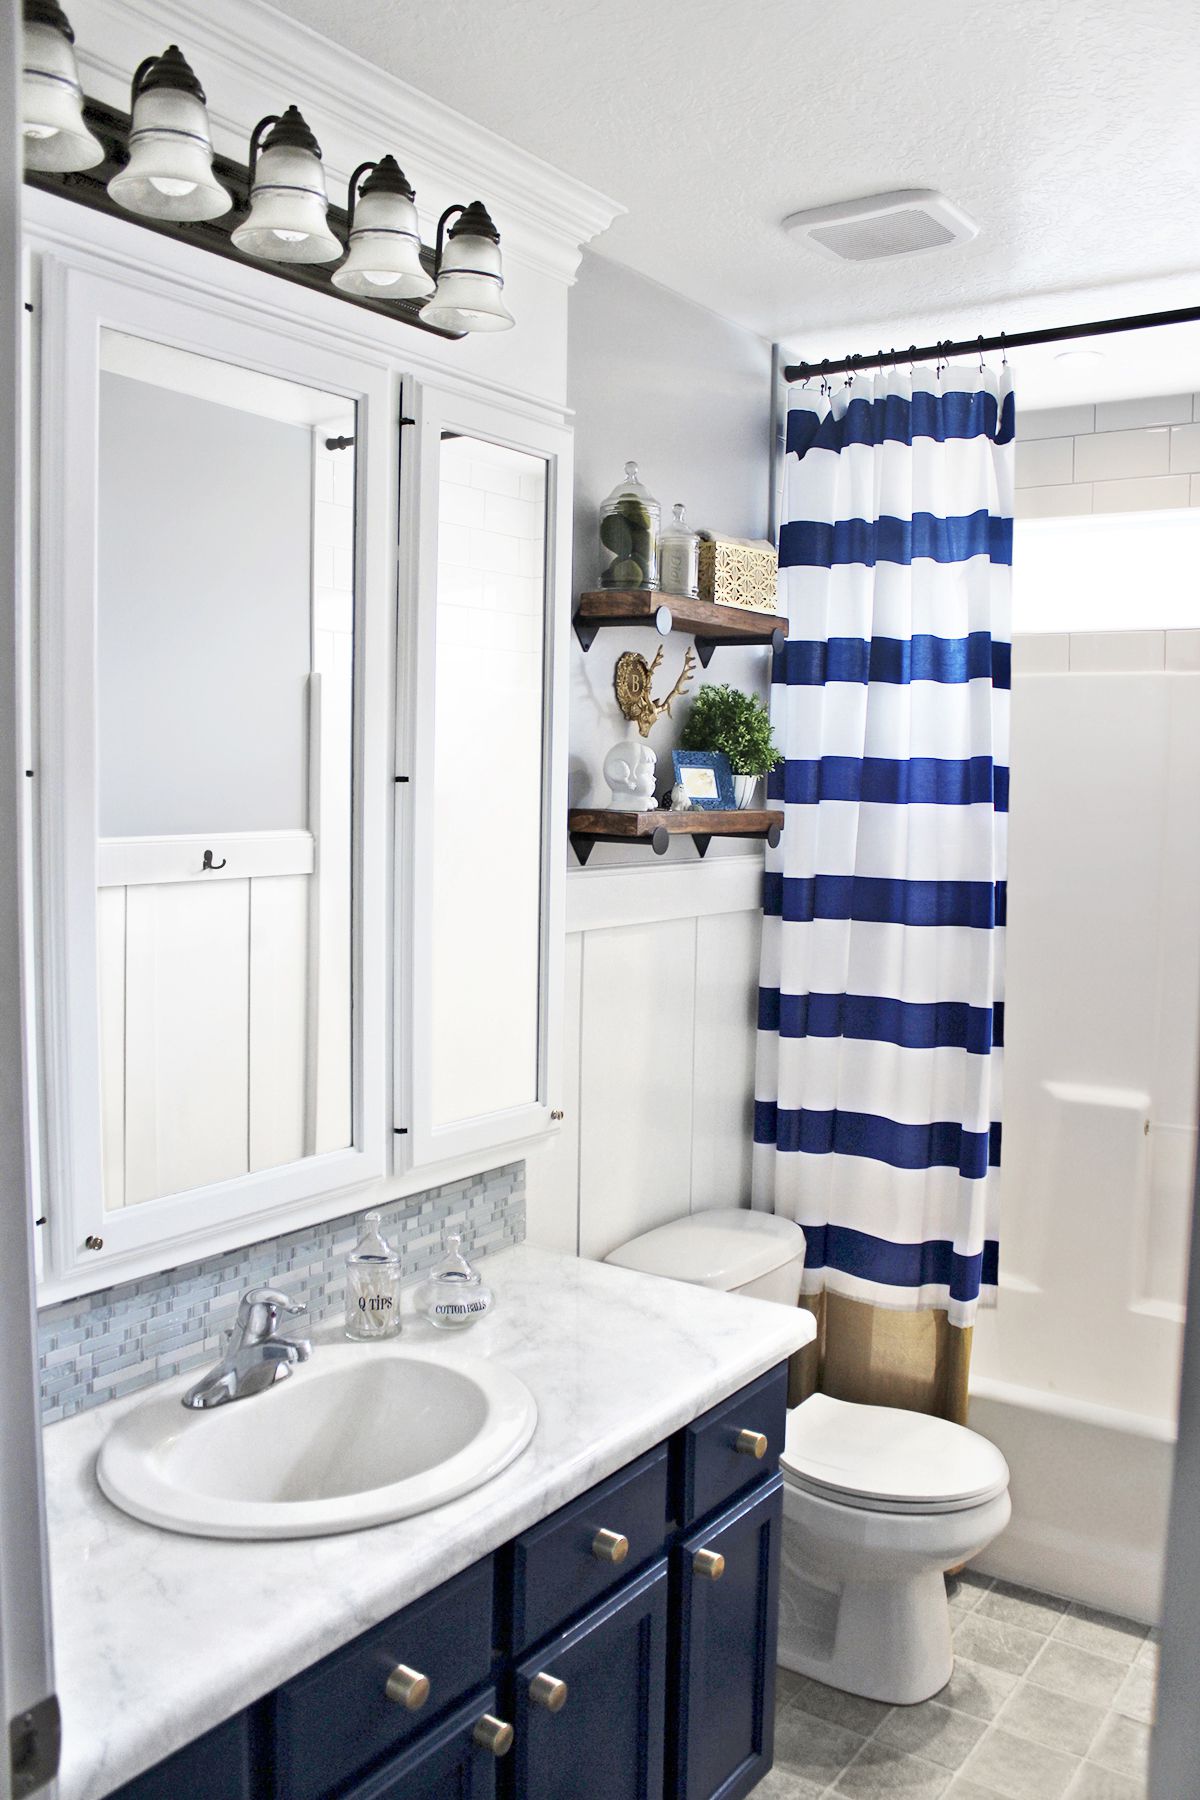 <p><strong>After:</strong> A capacious medicine cabinet and more shelving in the vanity help keep things organized; simple wainscoting and a stylish navy, gray, and white palette give the space loads more personality.</p>